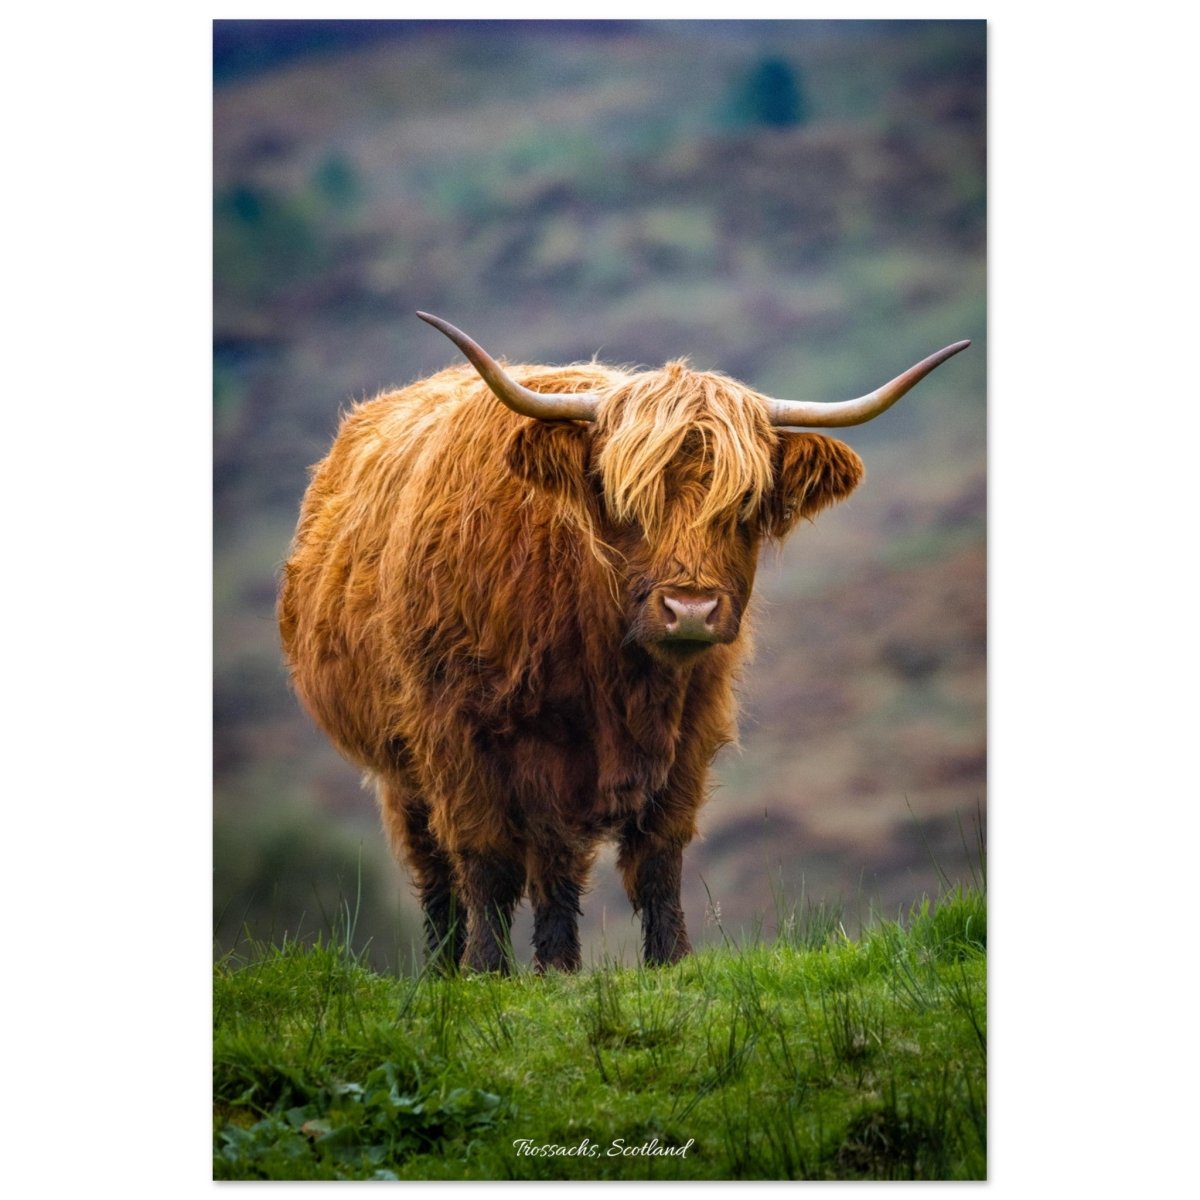 20x30 cm / 8x12″ Highland Cow of the Trossachs by Picture This